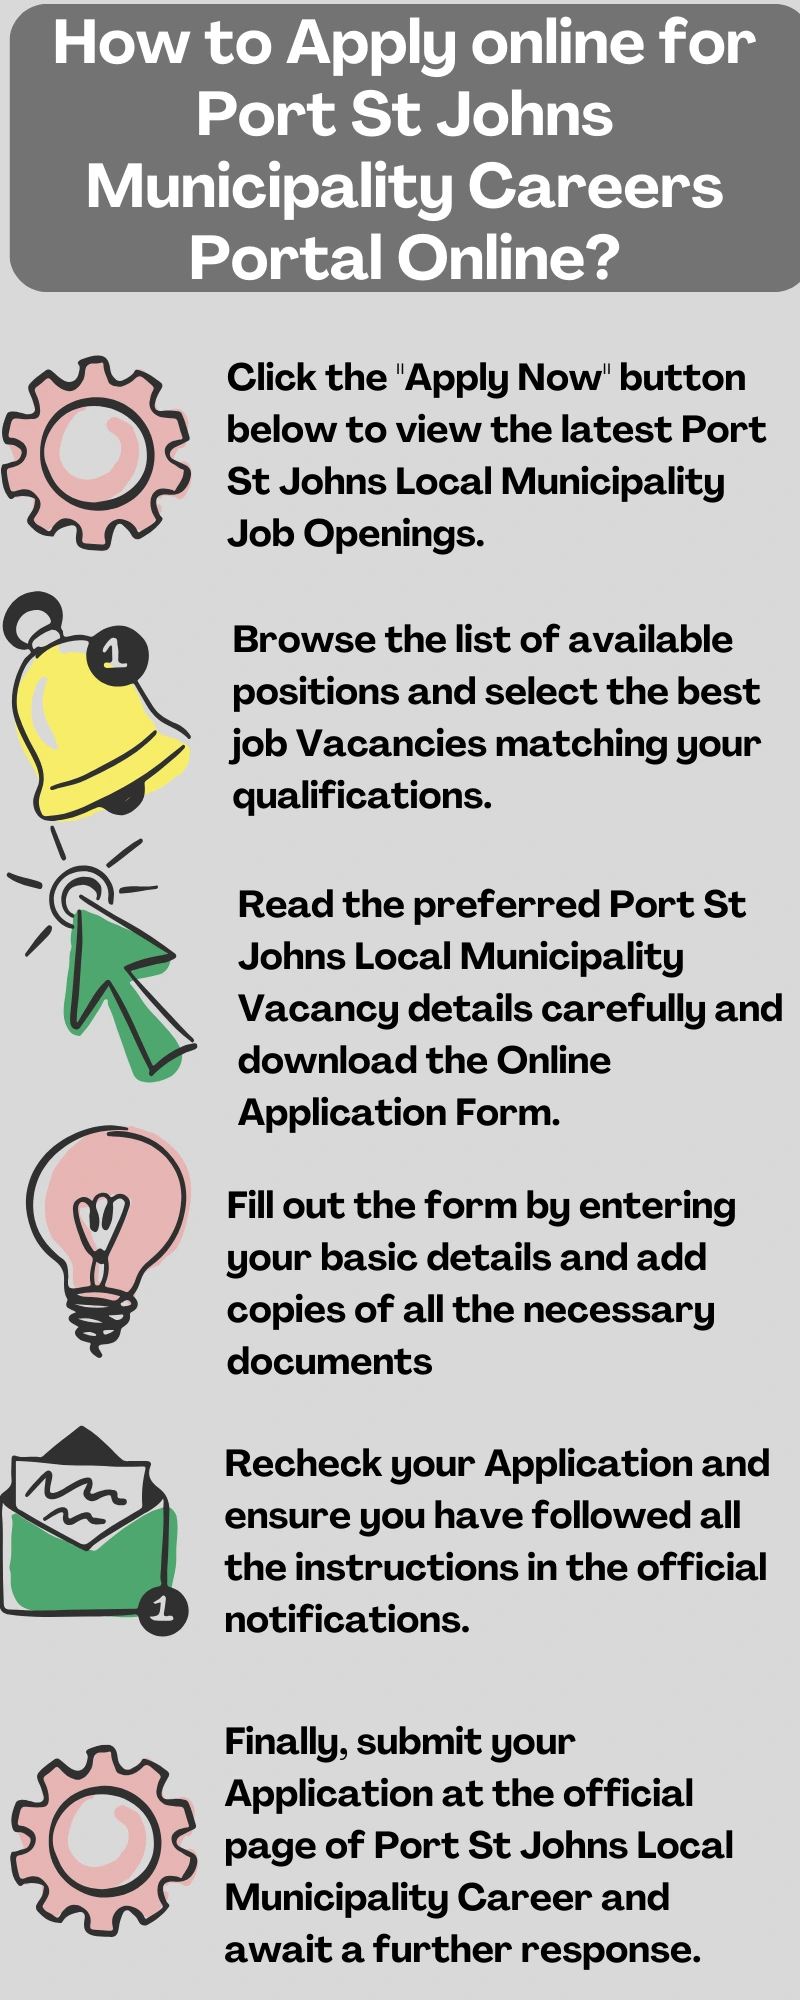 How to Apply online for Port St Johns Municipality Careers Portal Online?